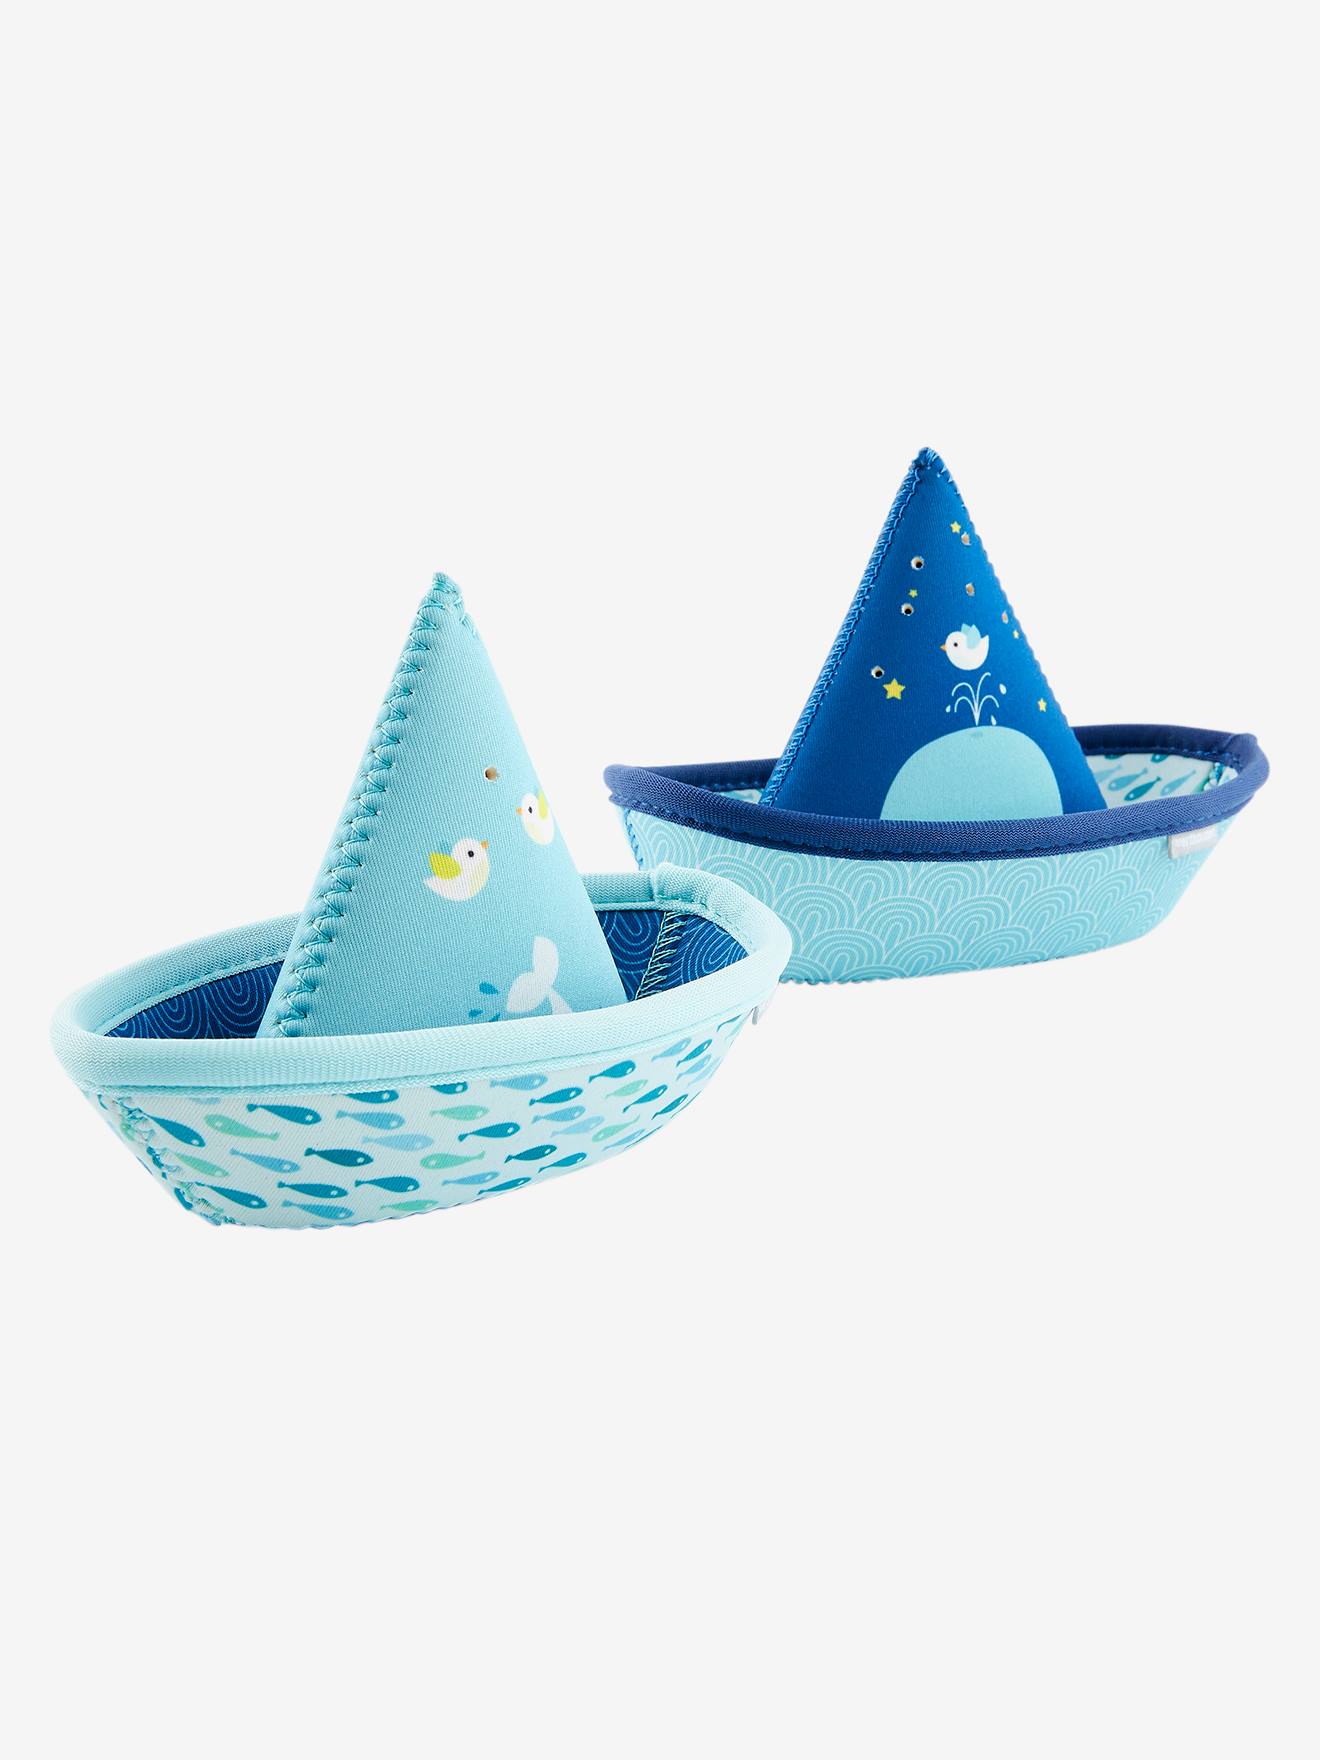 Bath Time Toy Boats